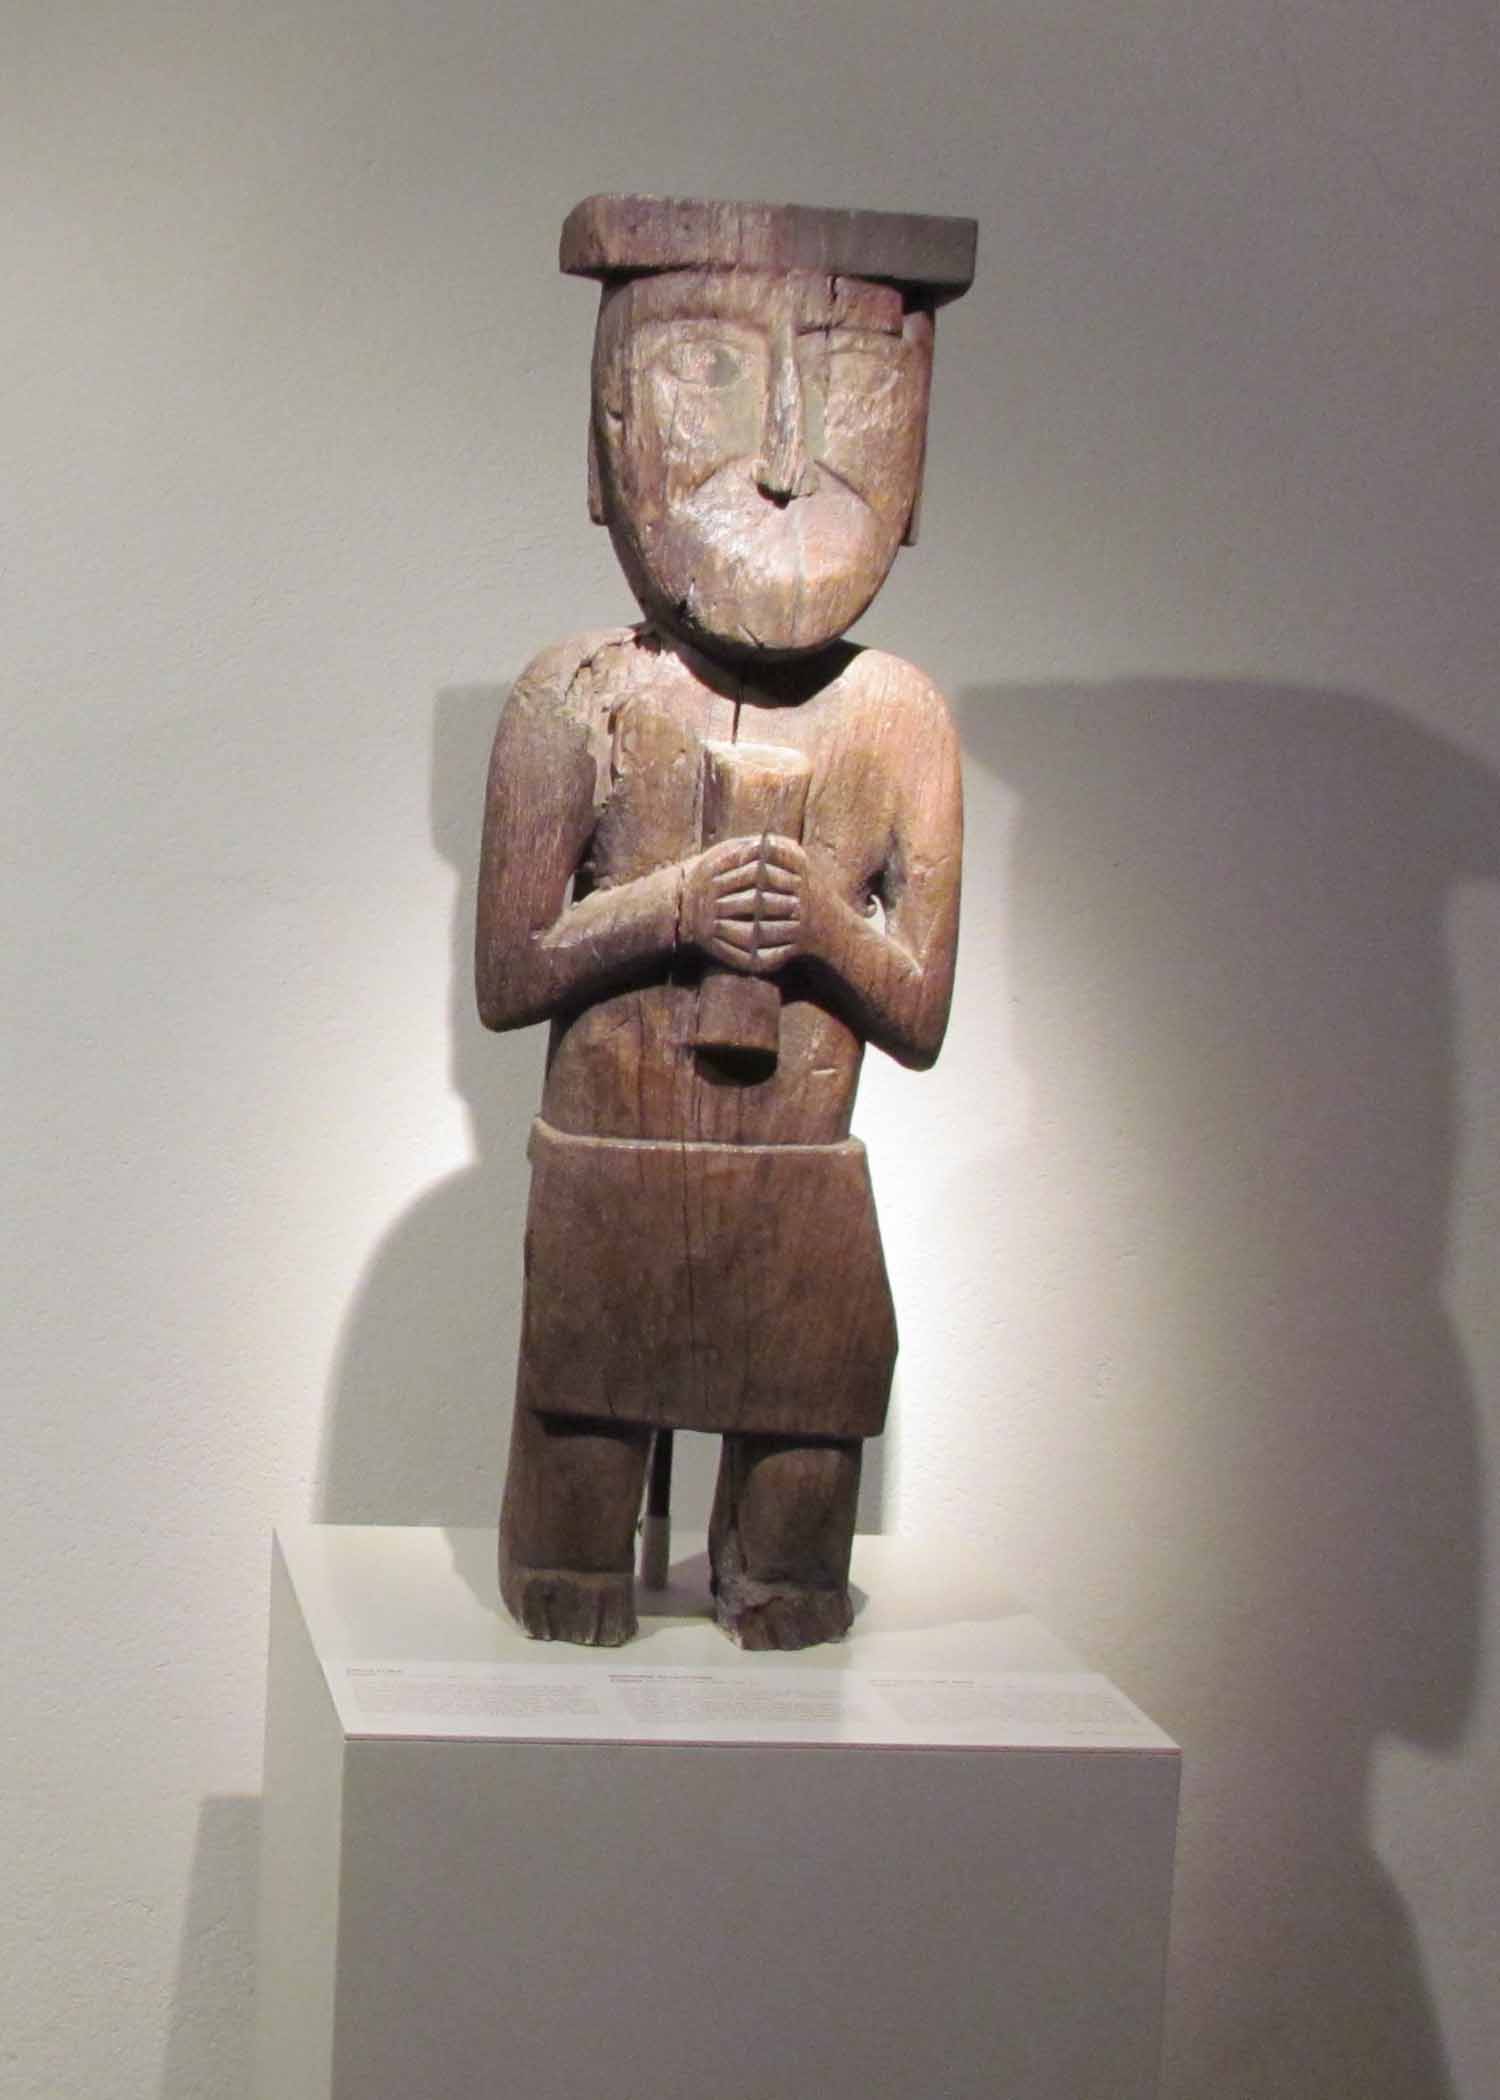 A wood carved figure on display at the Pre-Colombian Art Museum, Cusco, Peru | ©Angela Drake